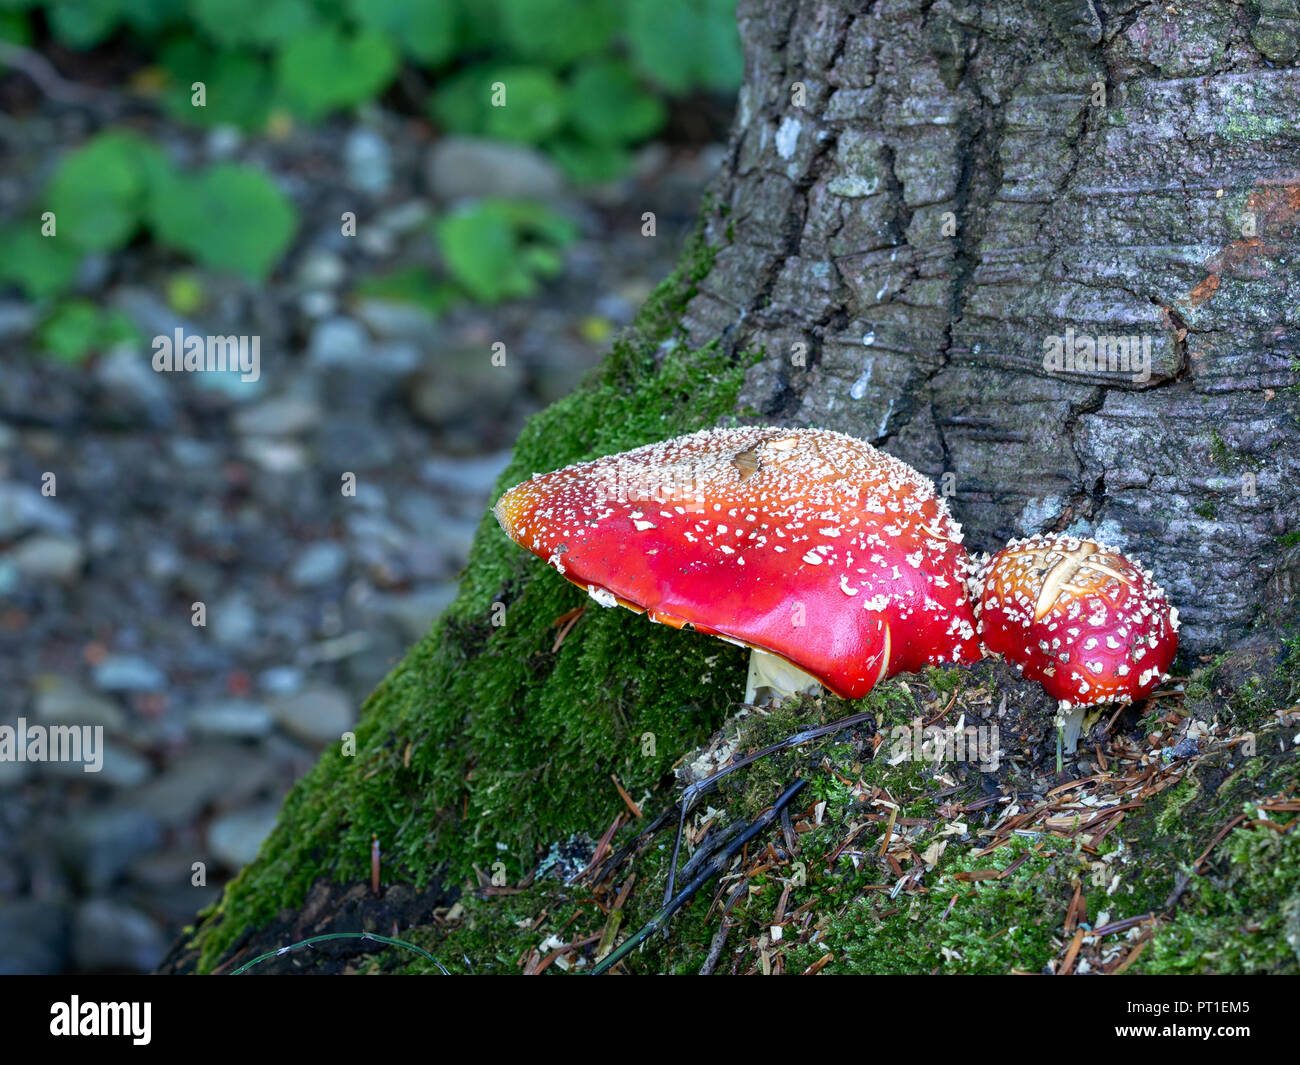 Amanita muscaria aka fly agaric is a red spotted poisonous mushroom, fungus. Stock Photo